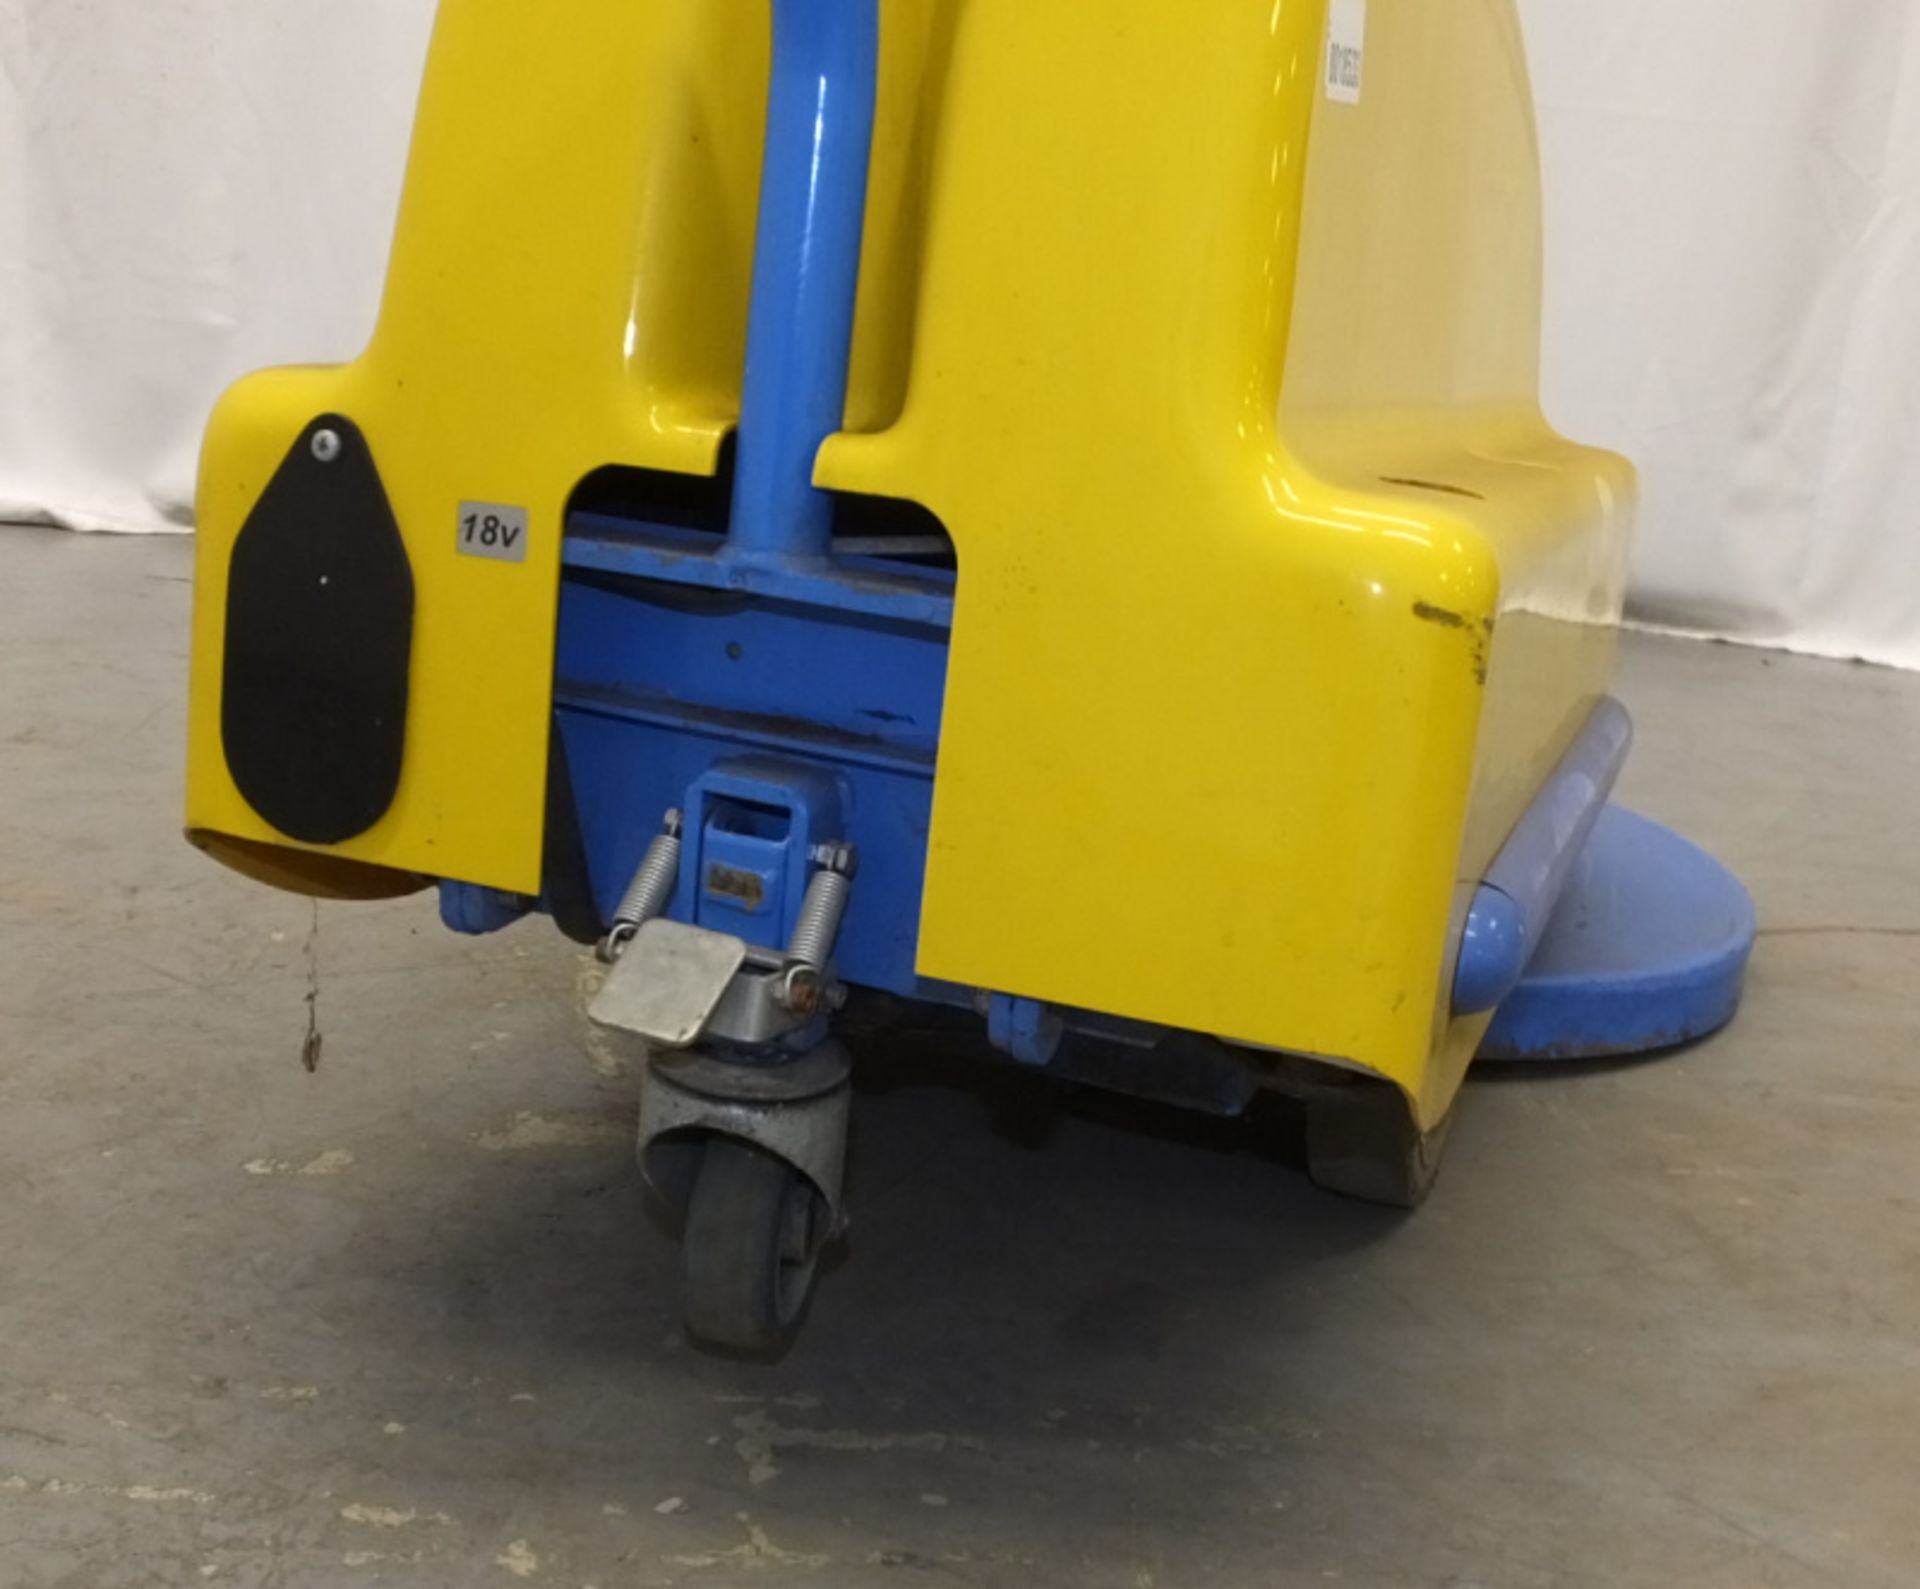 Tennant Challenger Nippy 500 Walk-Behind Floor Cleaner - no key - cracked casing as seen in pictures - Image 7 of 9